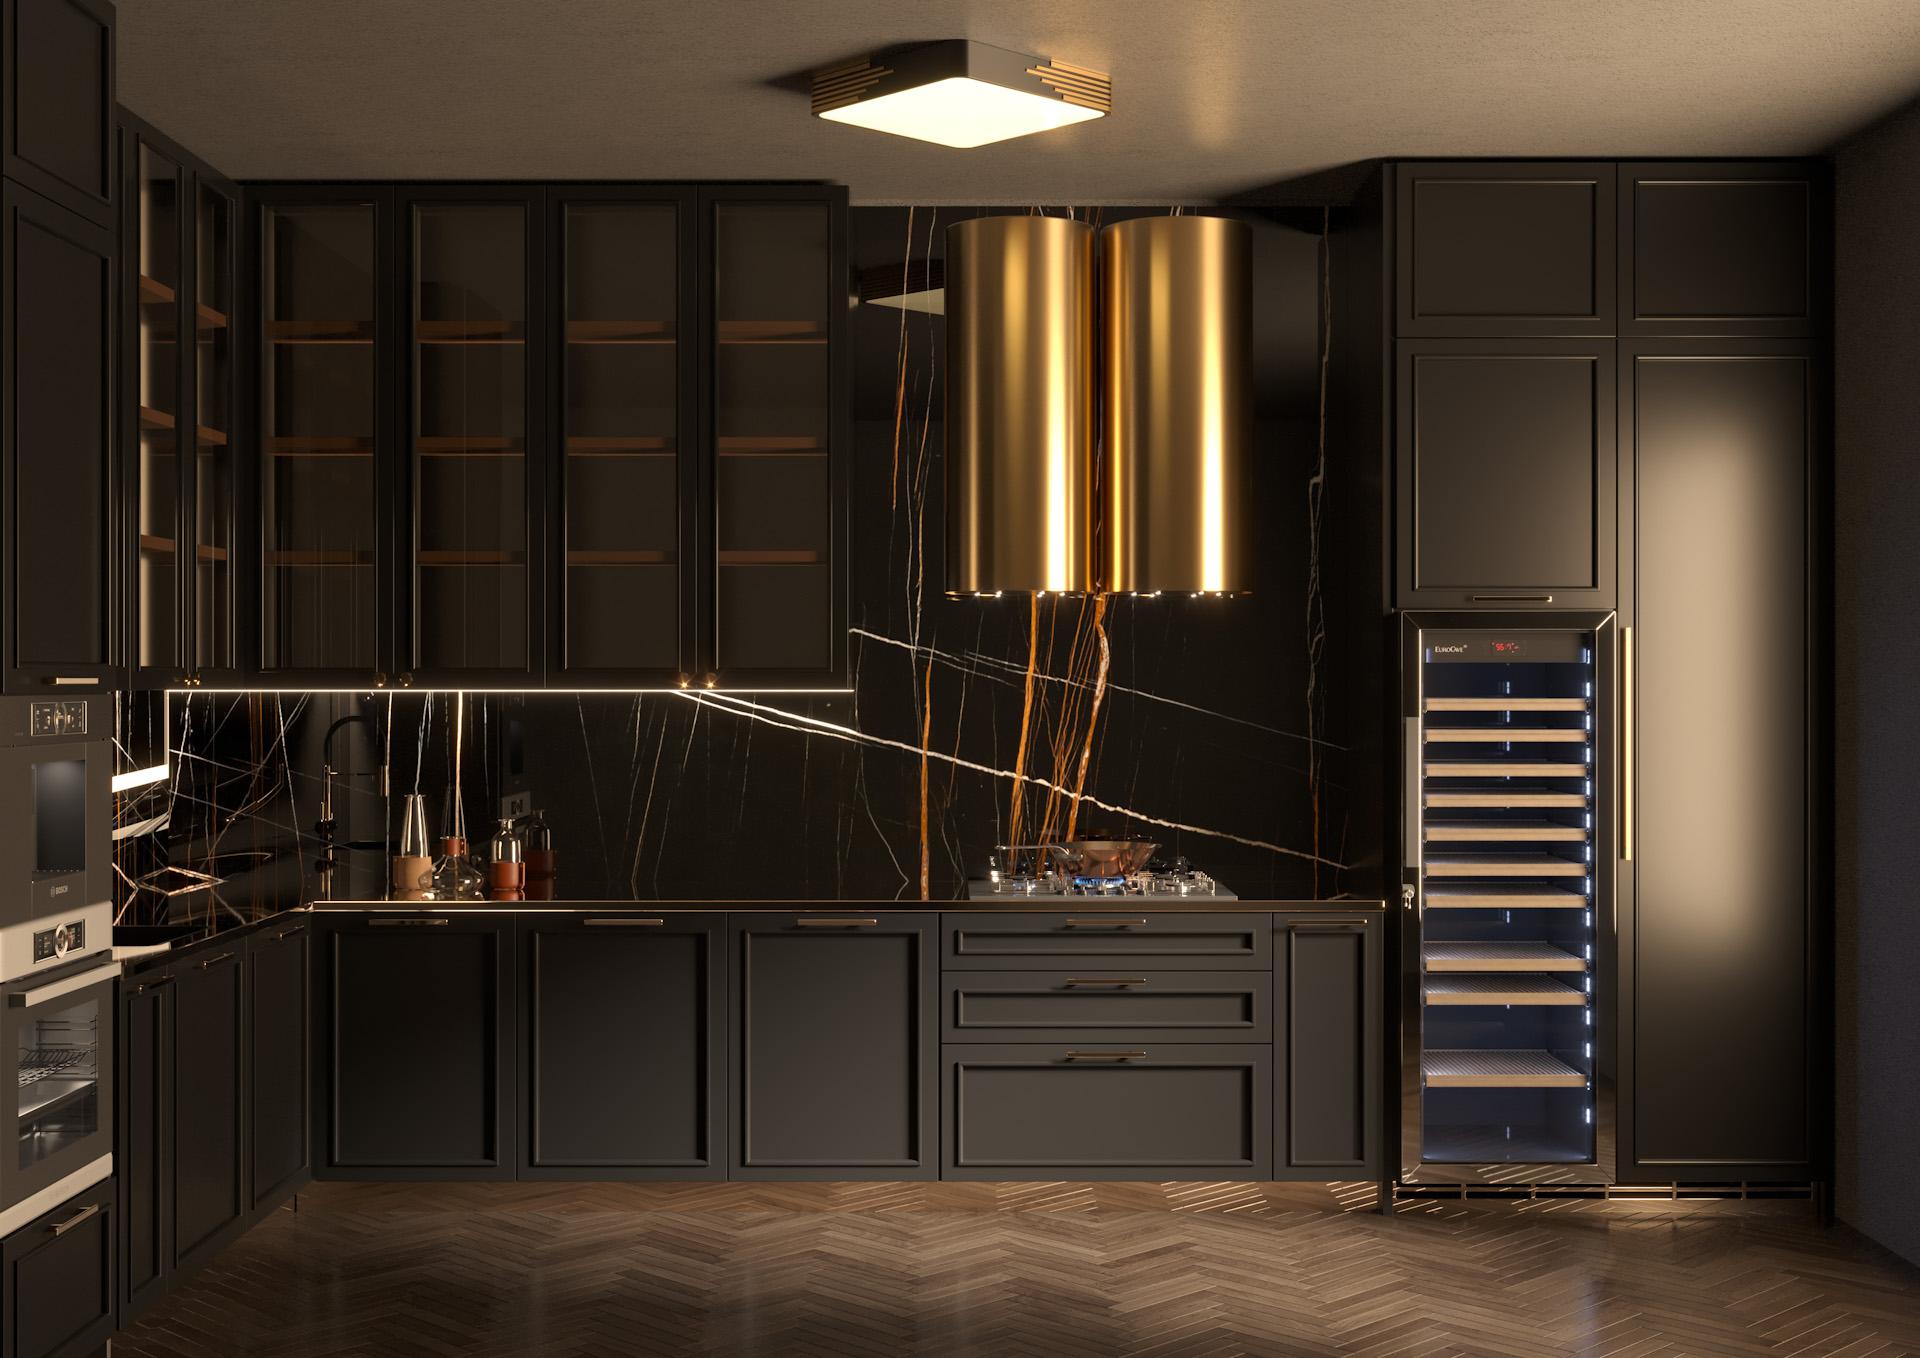 Amoretti Brothers cylinder brass range hood is the perfect touch of style for your kitchen. It includes a powerful internal OR external (above the ceiling) ventilation system. We manufacture each one by order just for you. Our hoods could be